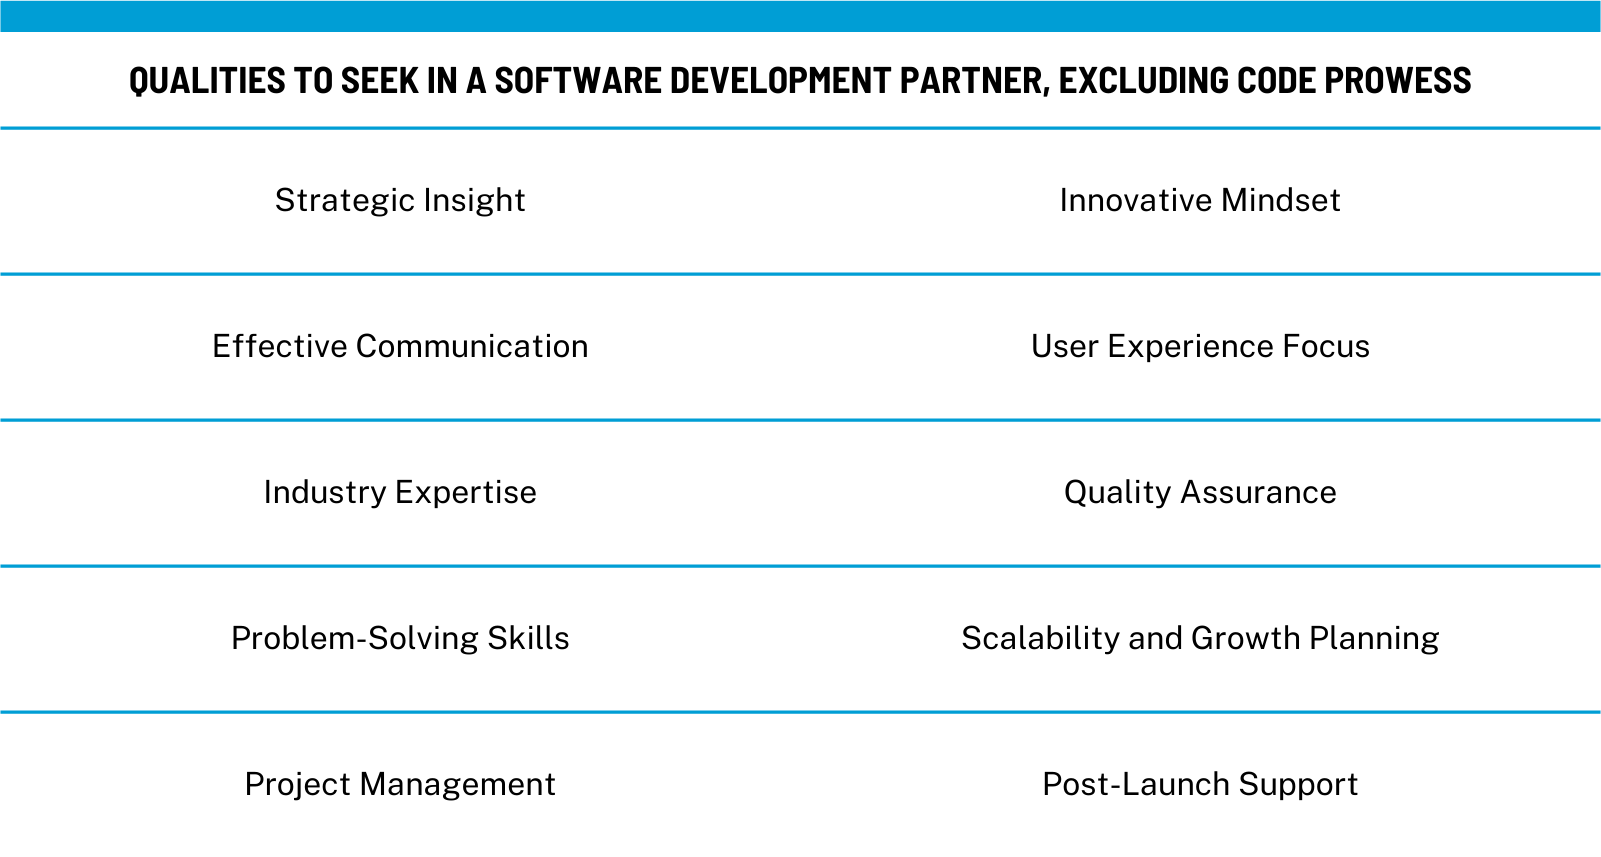 An infographic listing key qualities to consider when selecting a software development partner, including Strategic Insight, Effective Communication, Industry Expertise, Problem-Solving Skills, Project Management, Innovative Mindset, User Experience Focus, Quality Assurance, Scalability and Growth Planning, and Post-Launch Support.